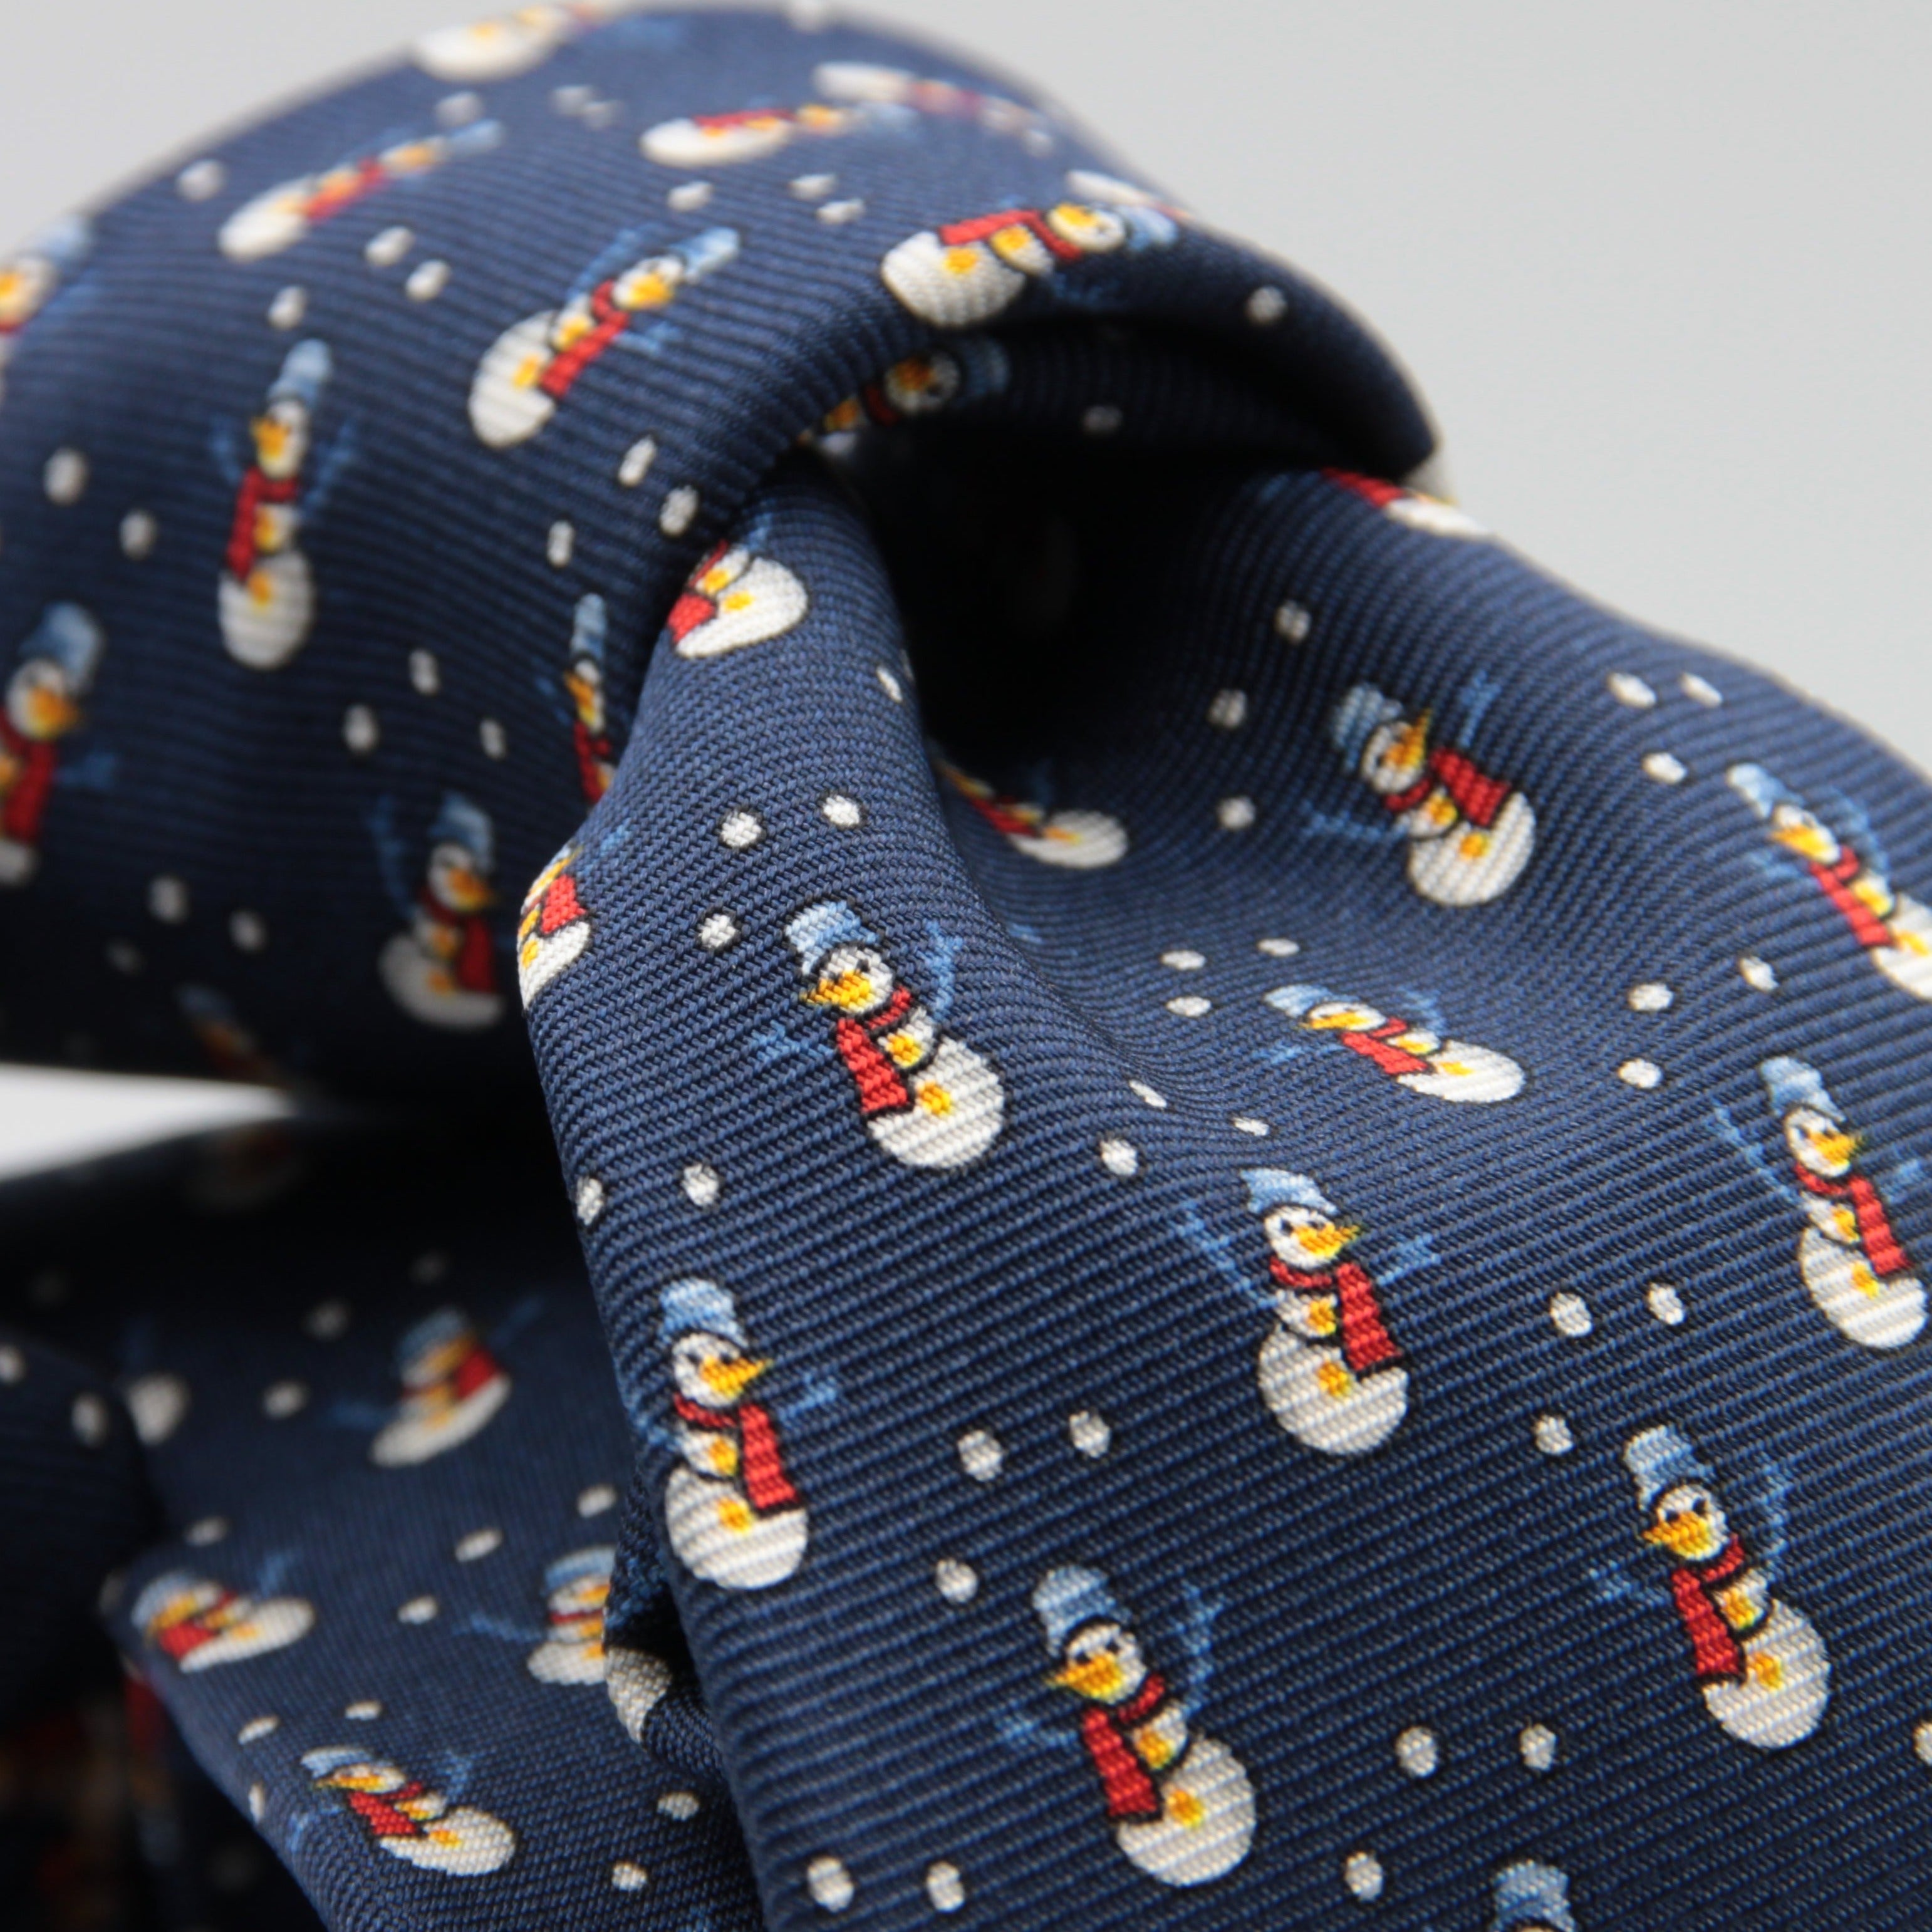 Holliday & Brown for Cruciani & Bella 100% printed Silk Self tipped Blue with Red Snowman tie Handmade in Italy 8 cm x 150 cm #1535